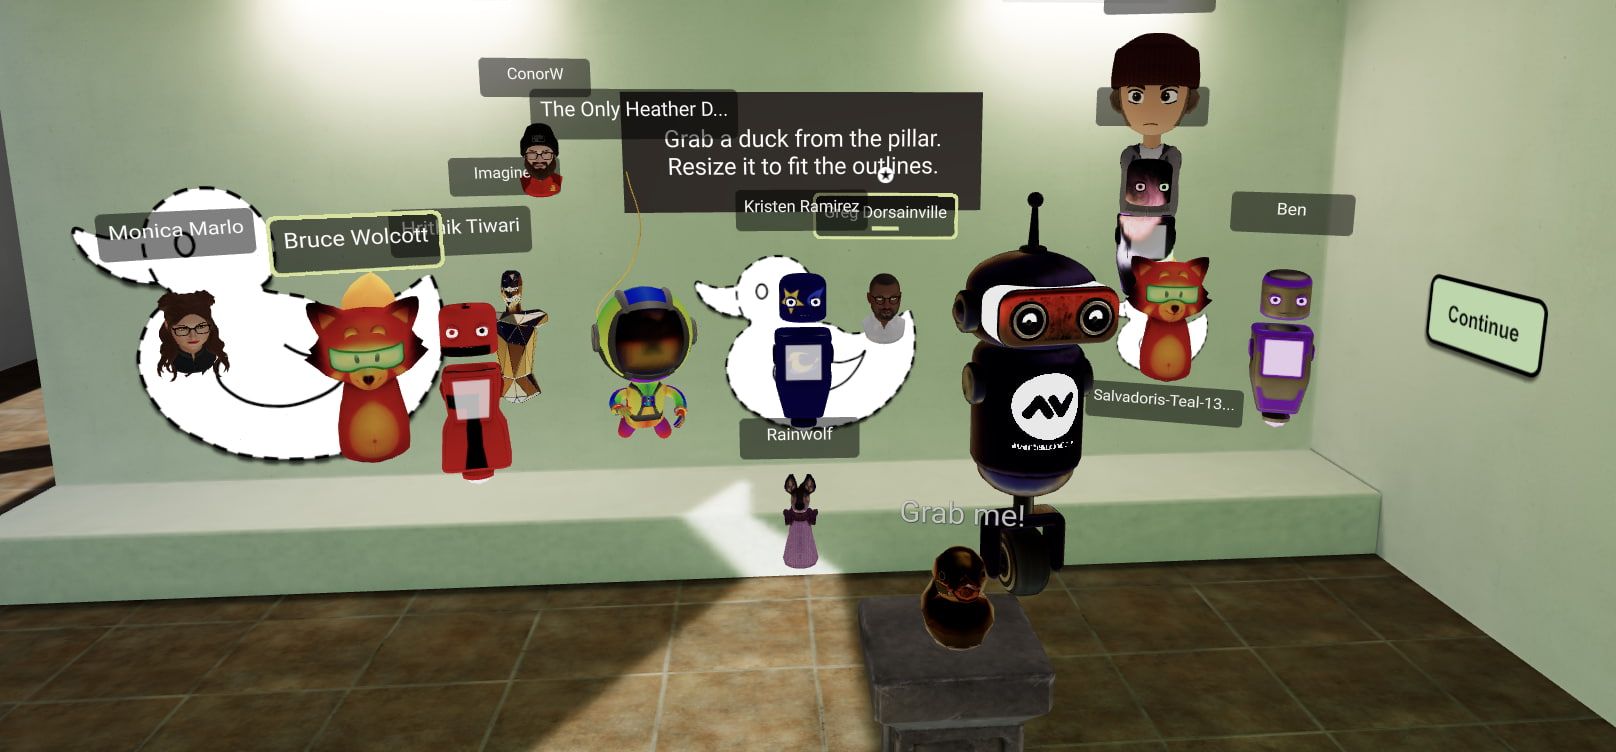 Group photo of a variety of avatars near a Hubs duck object.